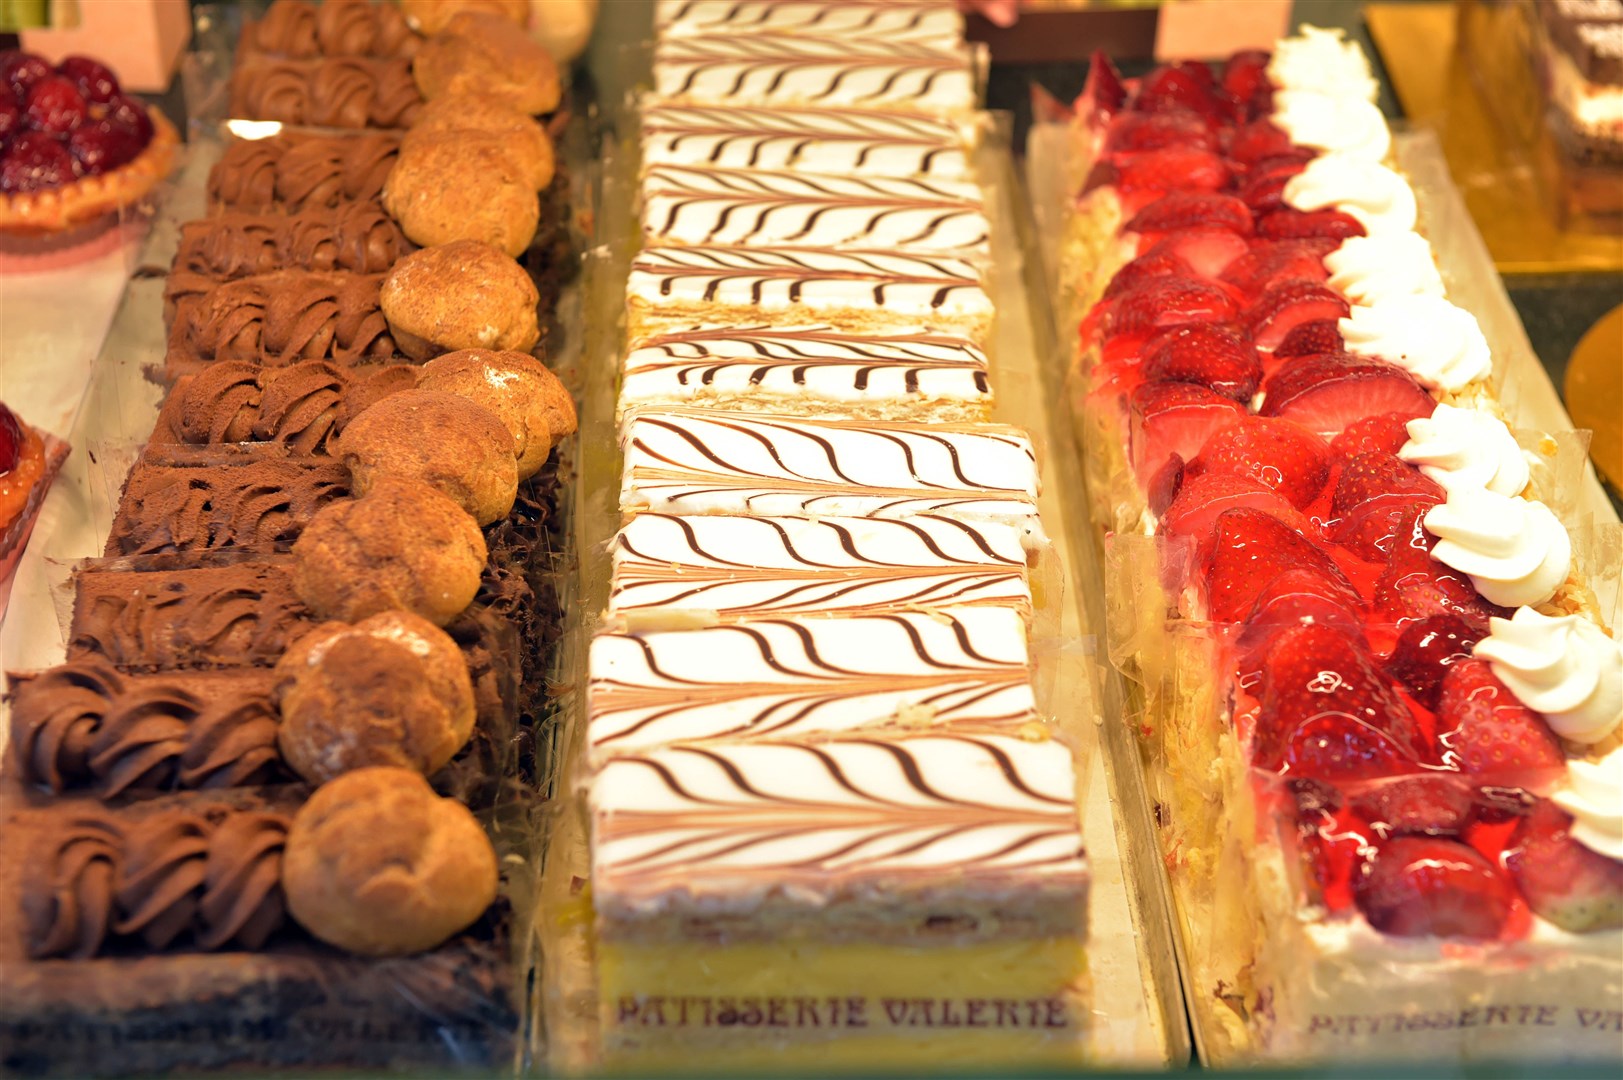 Patisserie Valerie cakes on display in a central London shop window (Nick Ansell/PA)